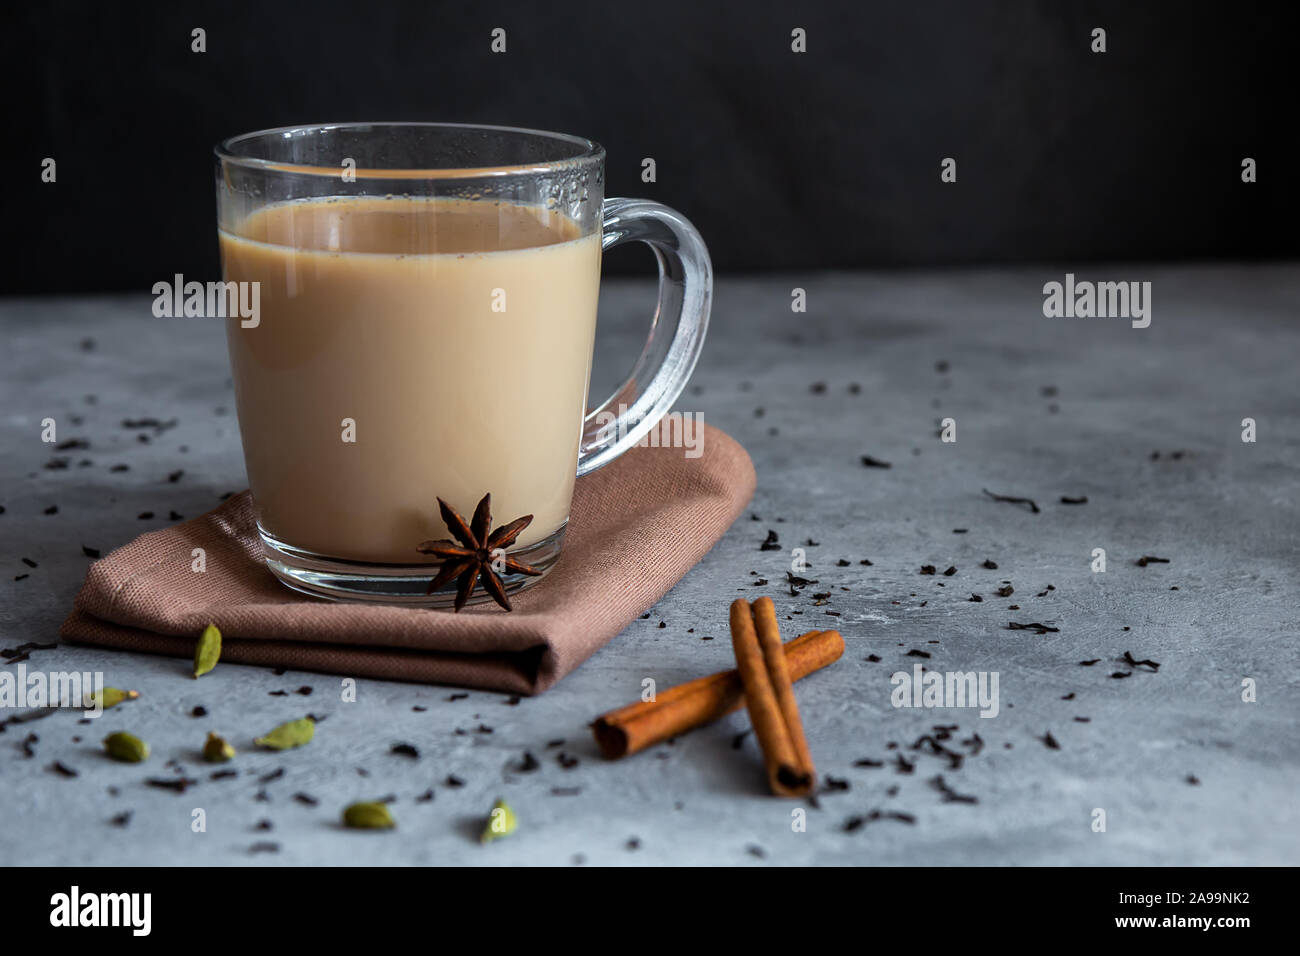 Traditional indian tea with spices in a glass mug on a dark background. Horizontal orientation, copy space Stock Photo